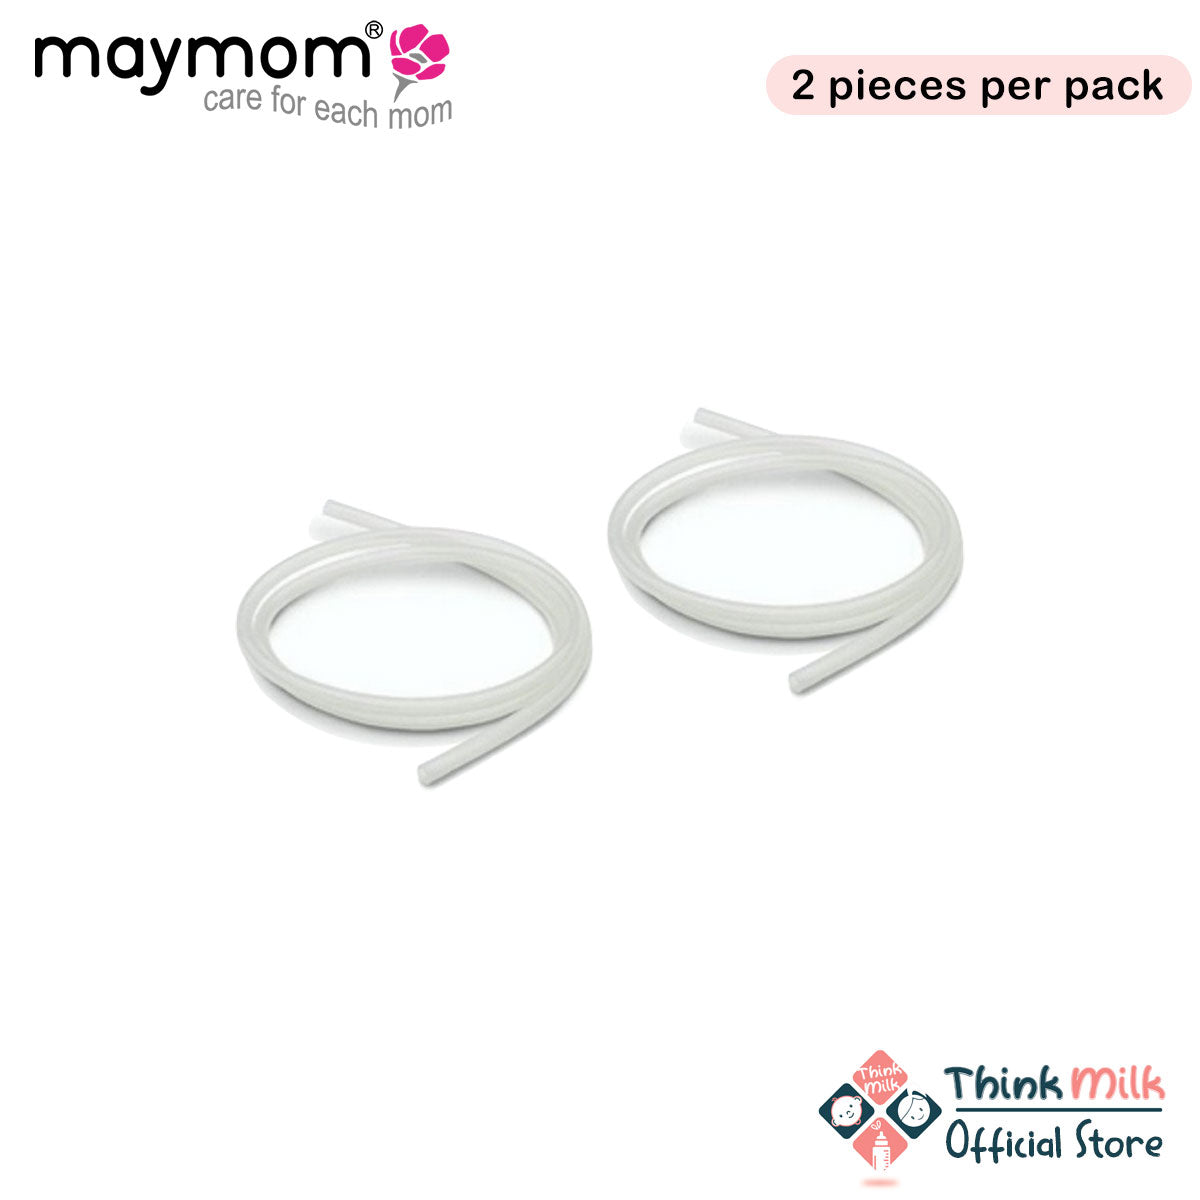 Maymom Tubing for Spectra 2pc/pack